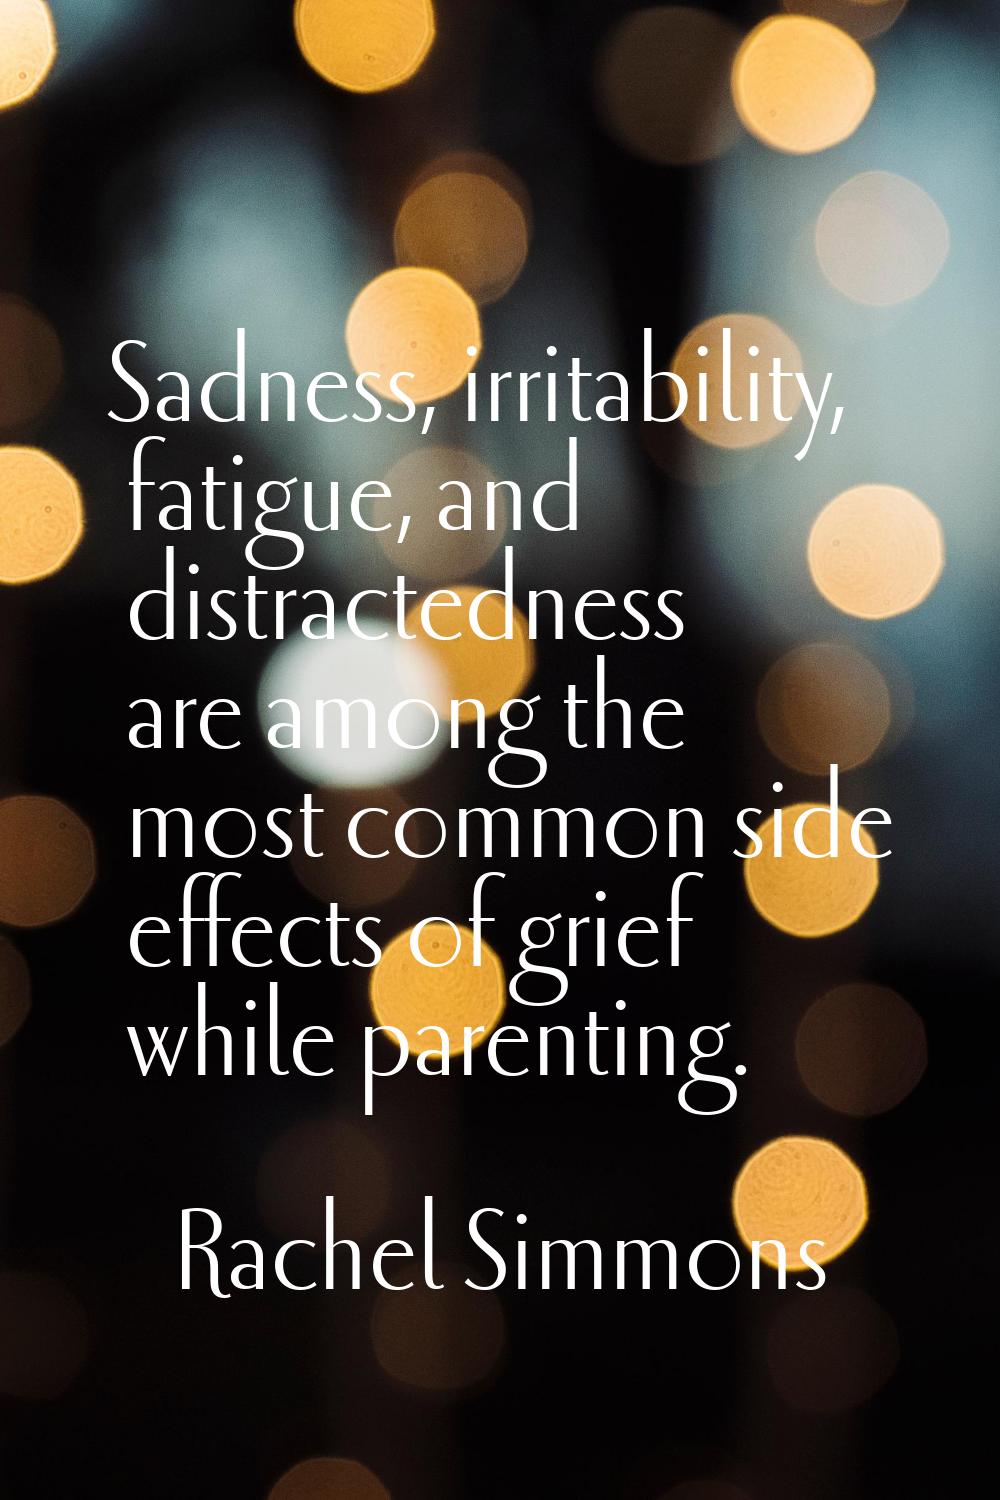 Sadness, irritability, fatigue, and distractedness are among the most common side effects of grief 